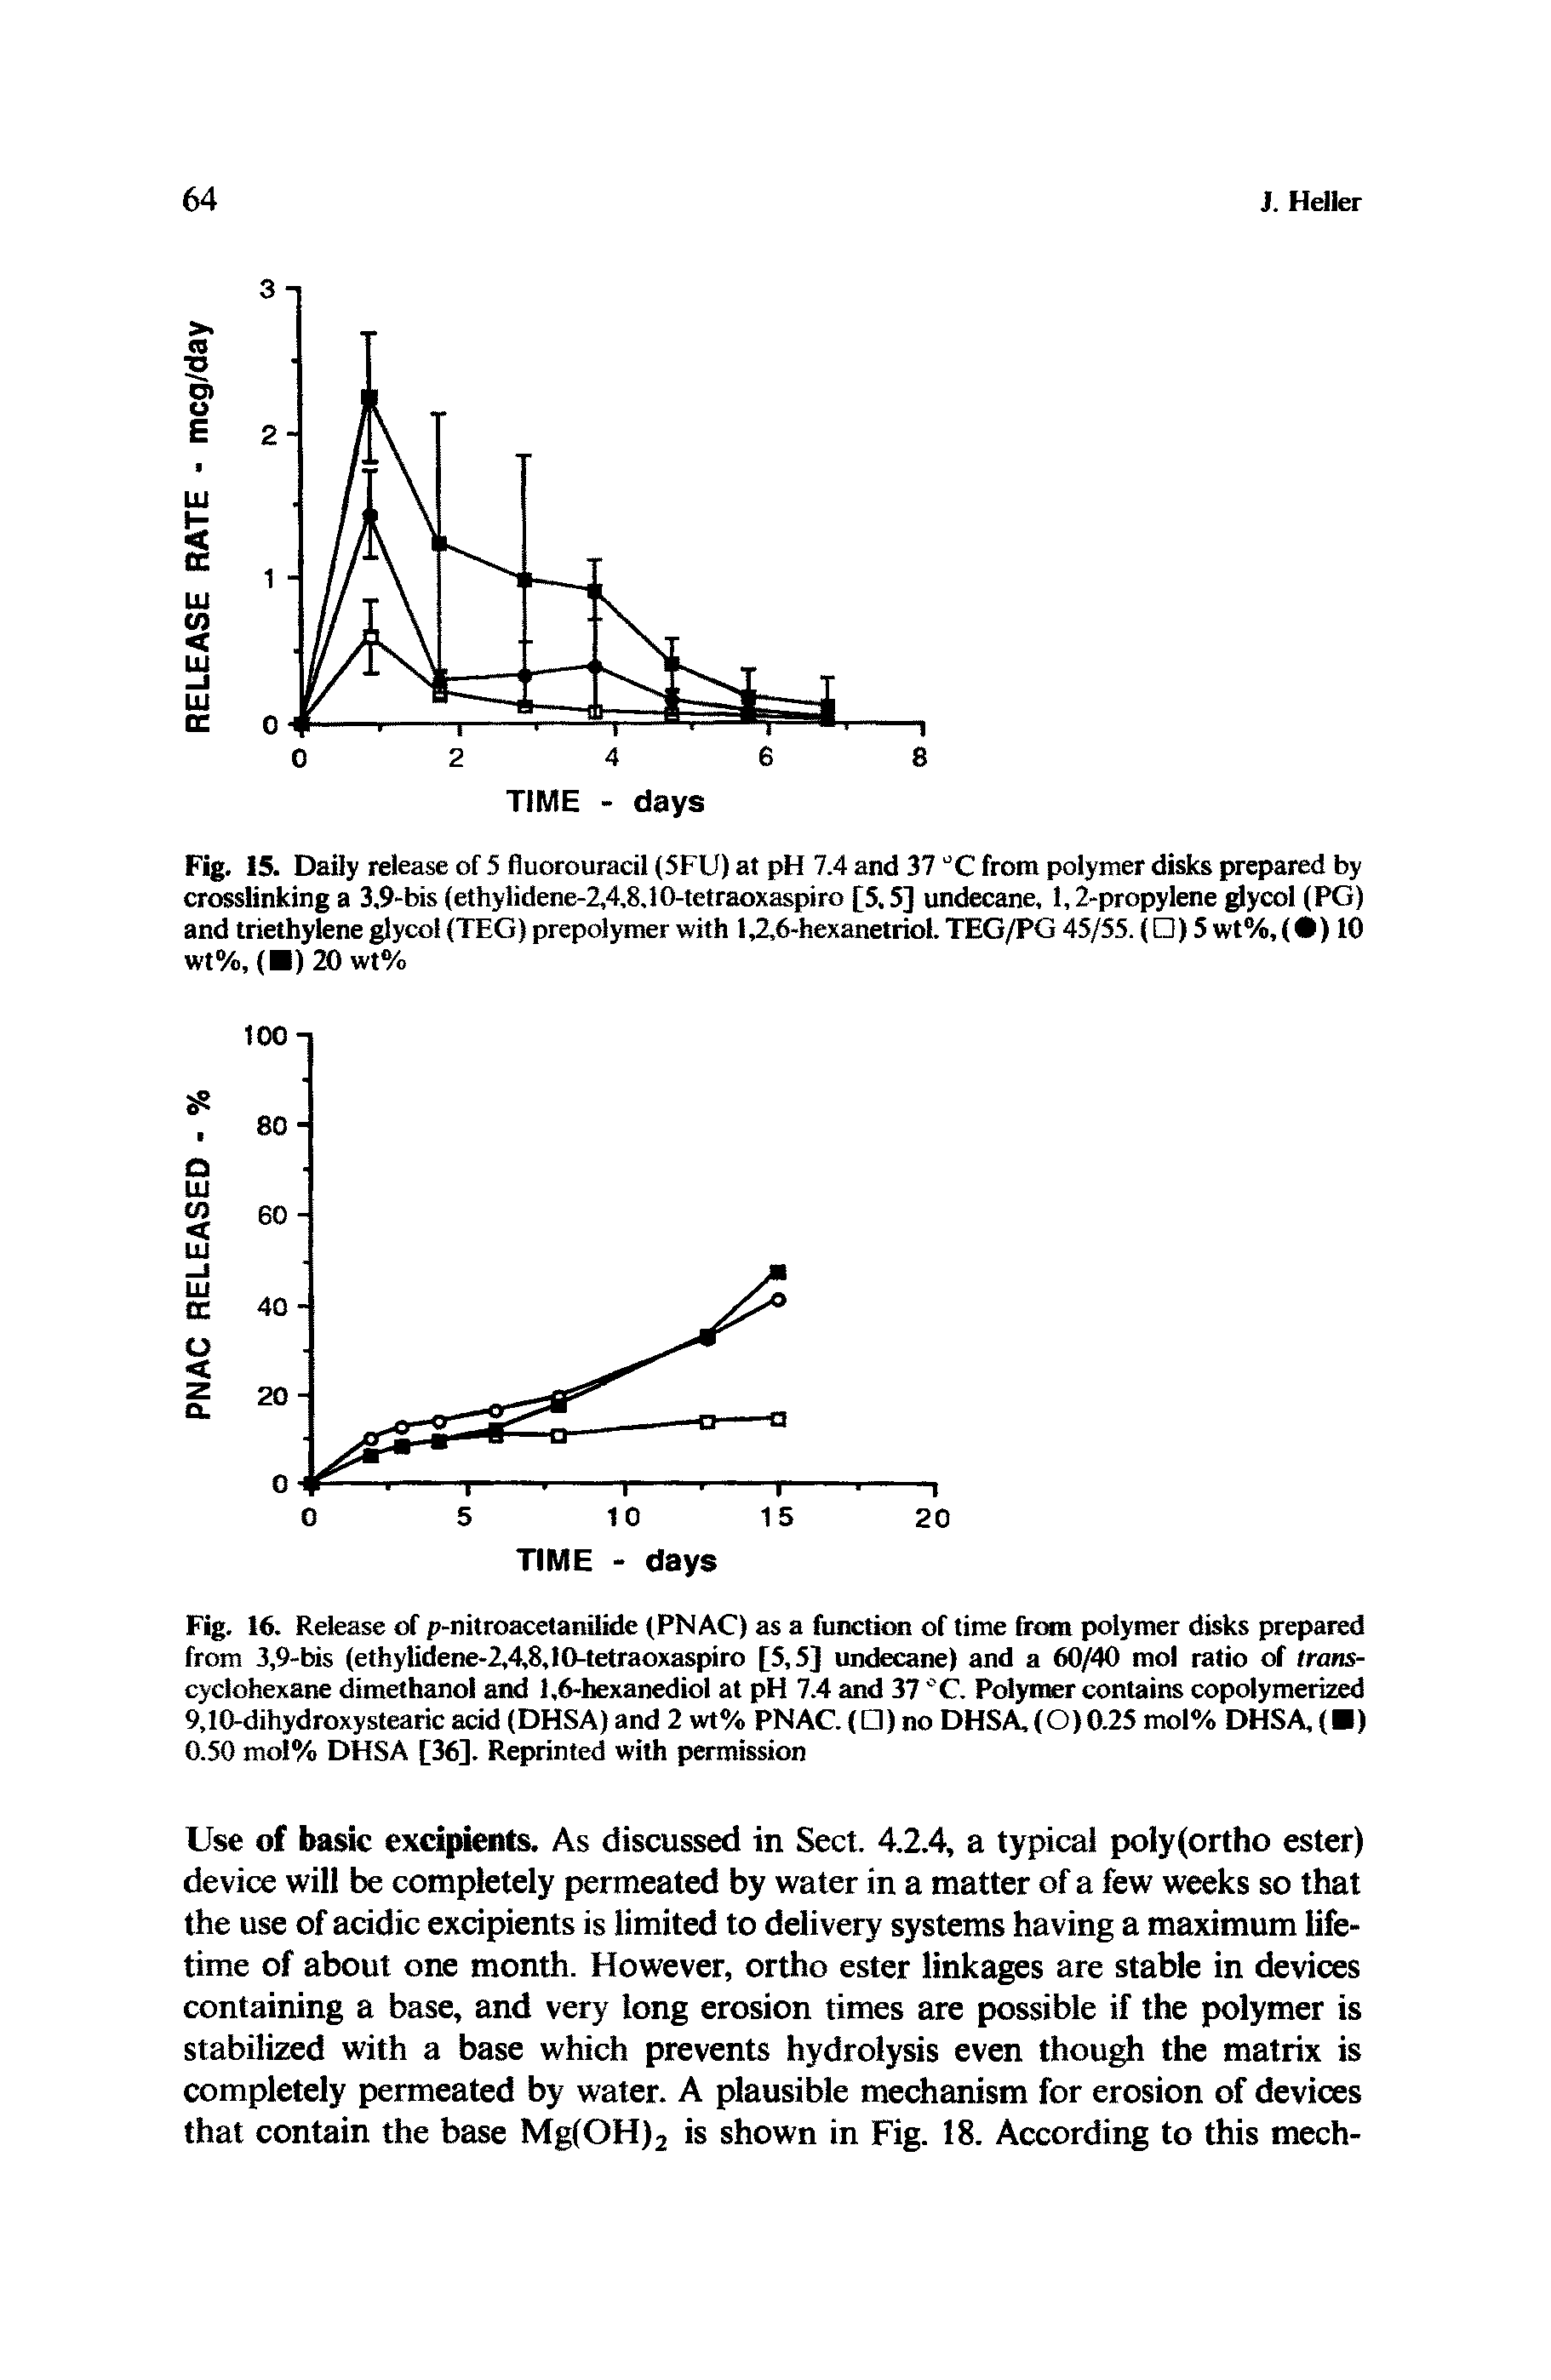 Fig. 16. Release of p-nitroacetanilide (PNAC) as a function of time from polymer disks prepared from 3,9-bis (ethylidene-2,4,8,10-tetraoxaspiro [5,5] undecane) and a 60/40 mol ratio of transcyclohexane dimethanol and 1,6-hexanediol at pH 7.4 and 37 °C. Polymer contains copolymerized 9,10-dihydroxystearic acid (DHSA) and 2 wt% PNAC.(D) no DHSA,(O)0.25 mol% DHSA, ( ) 0.50 mol% DHSA [36]. Reprinted with permission...